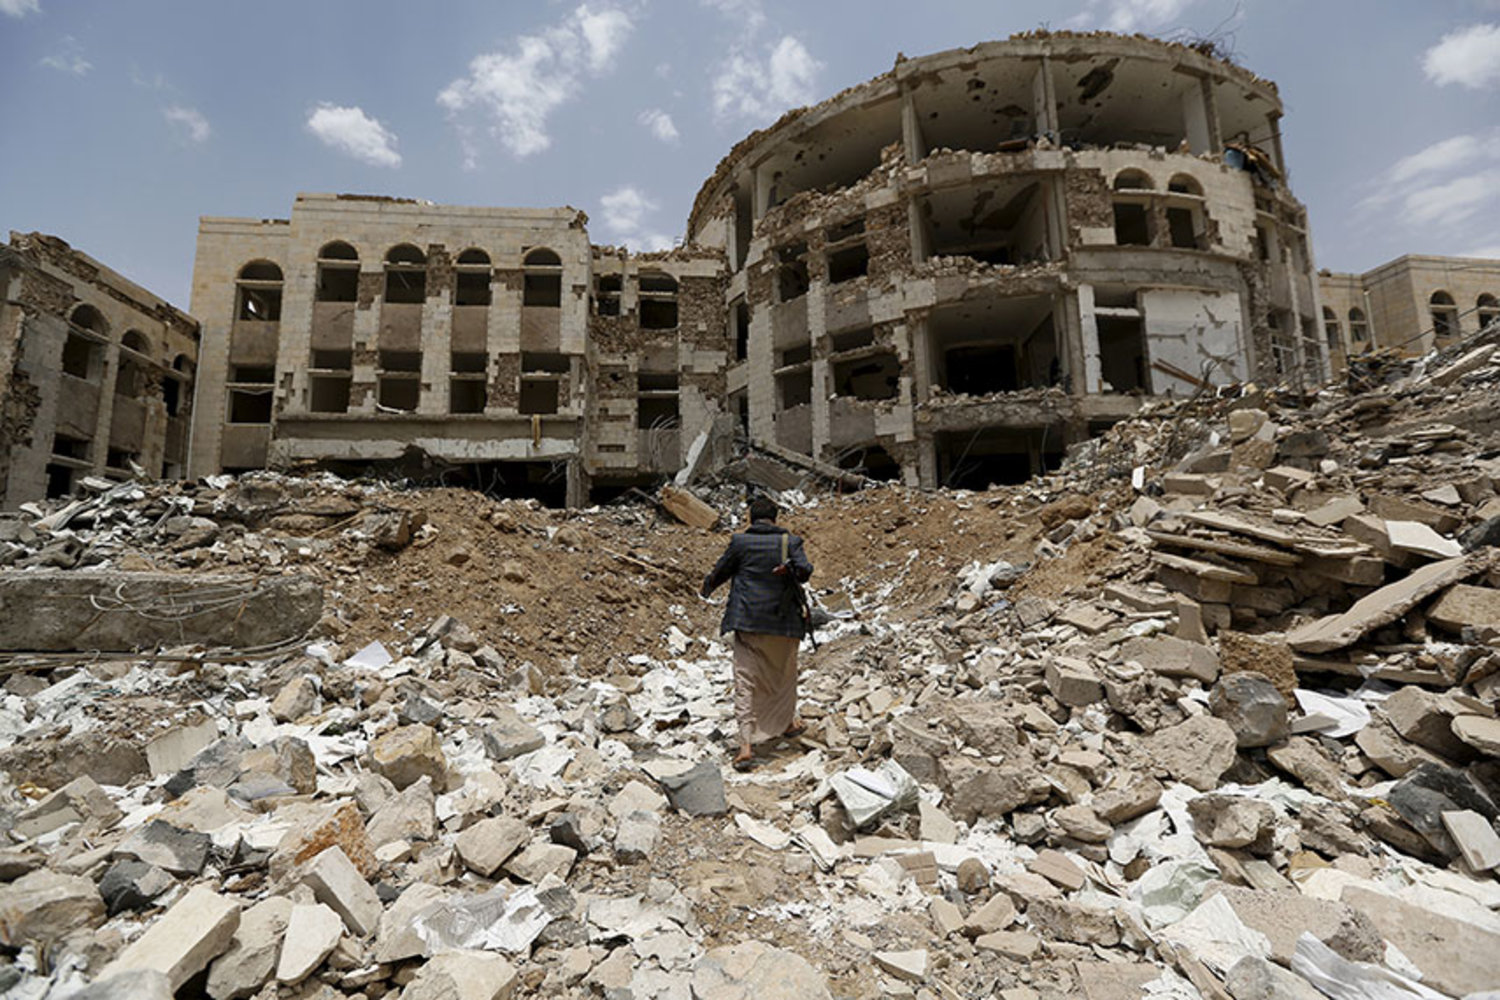 A Houthi militant walks through the rubble in Yemen. (Reuters)